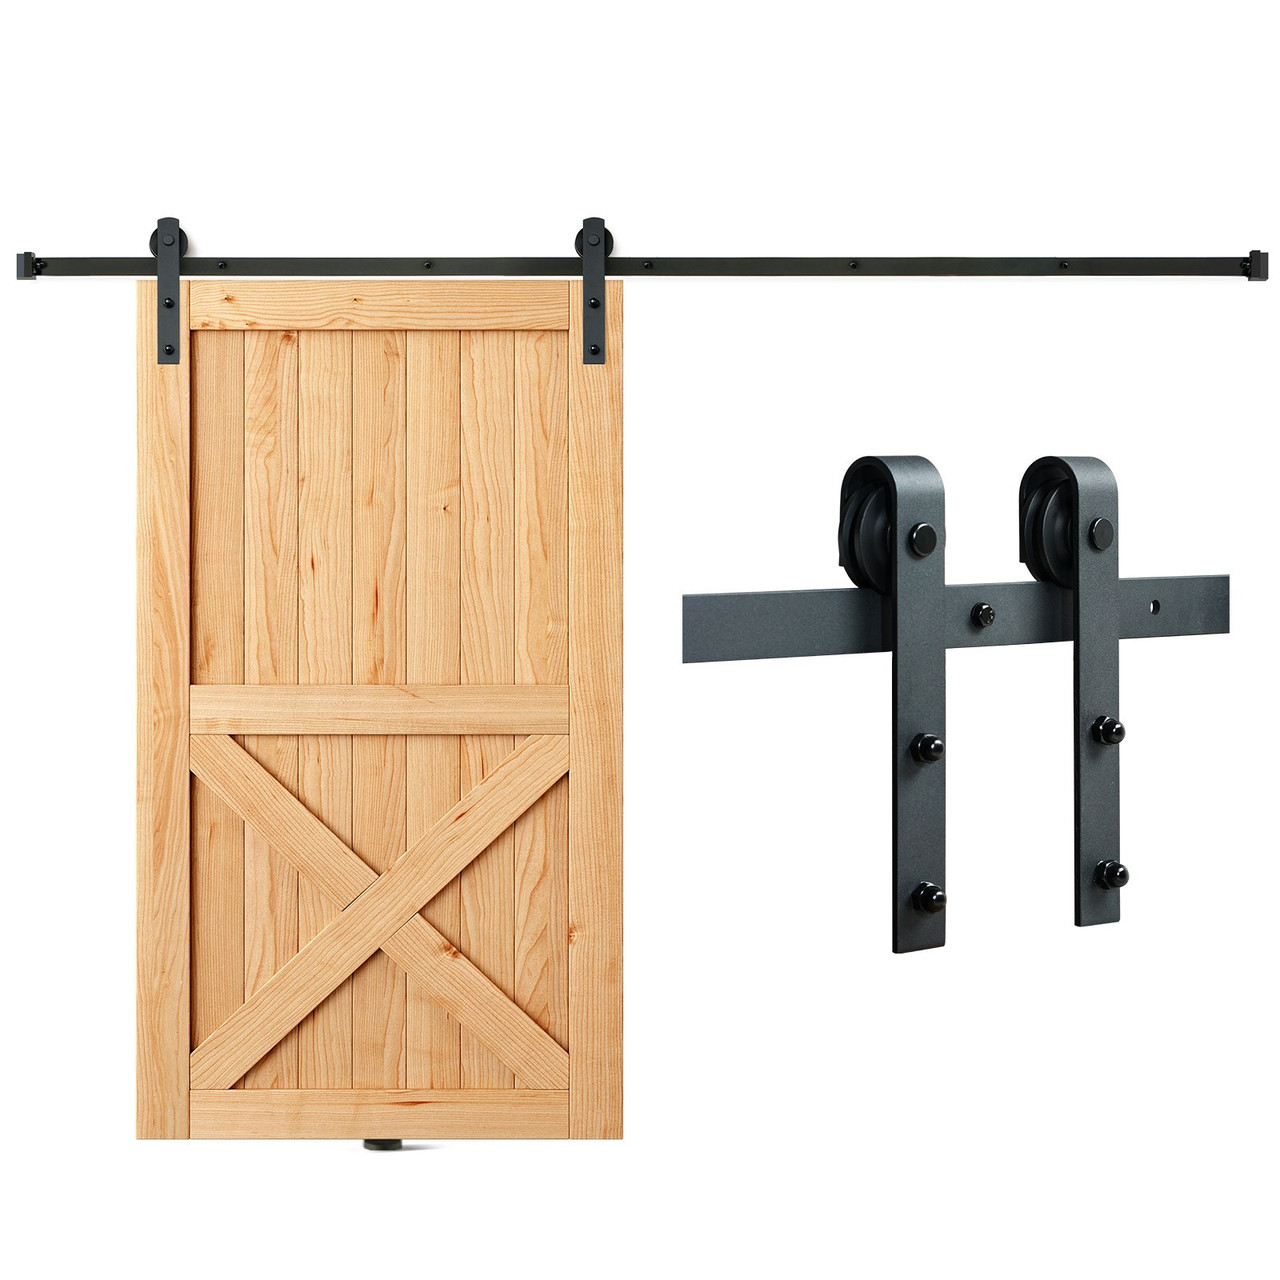 VEVOR 8FT Sliding Barn Door Hardware Kit, 330LBS Loading Heavy Duty Barn Door Track Kit for Single Door, Fit 3.7-4.3FT Wide and 1.3"-1.8" Thick Door Panel, with Smooth & Silent Pulley (J Shape)